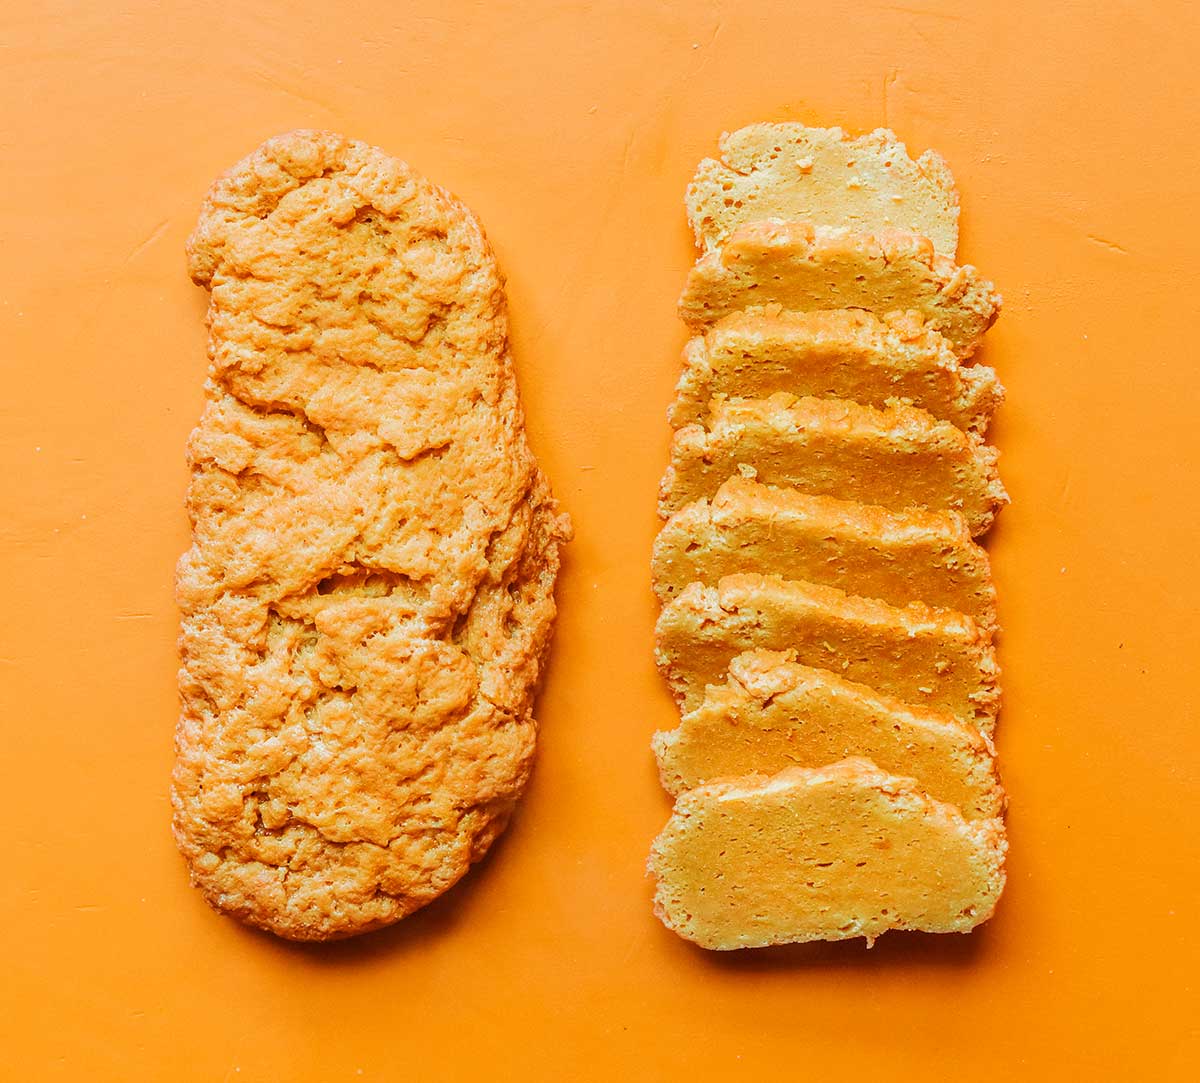 A whole and a sliced loaf of seitan sitting side by side on an orange background